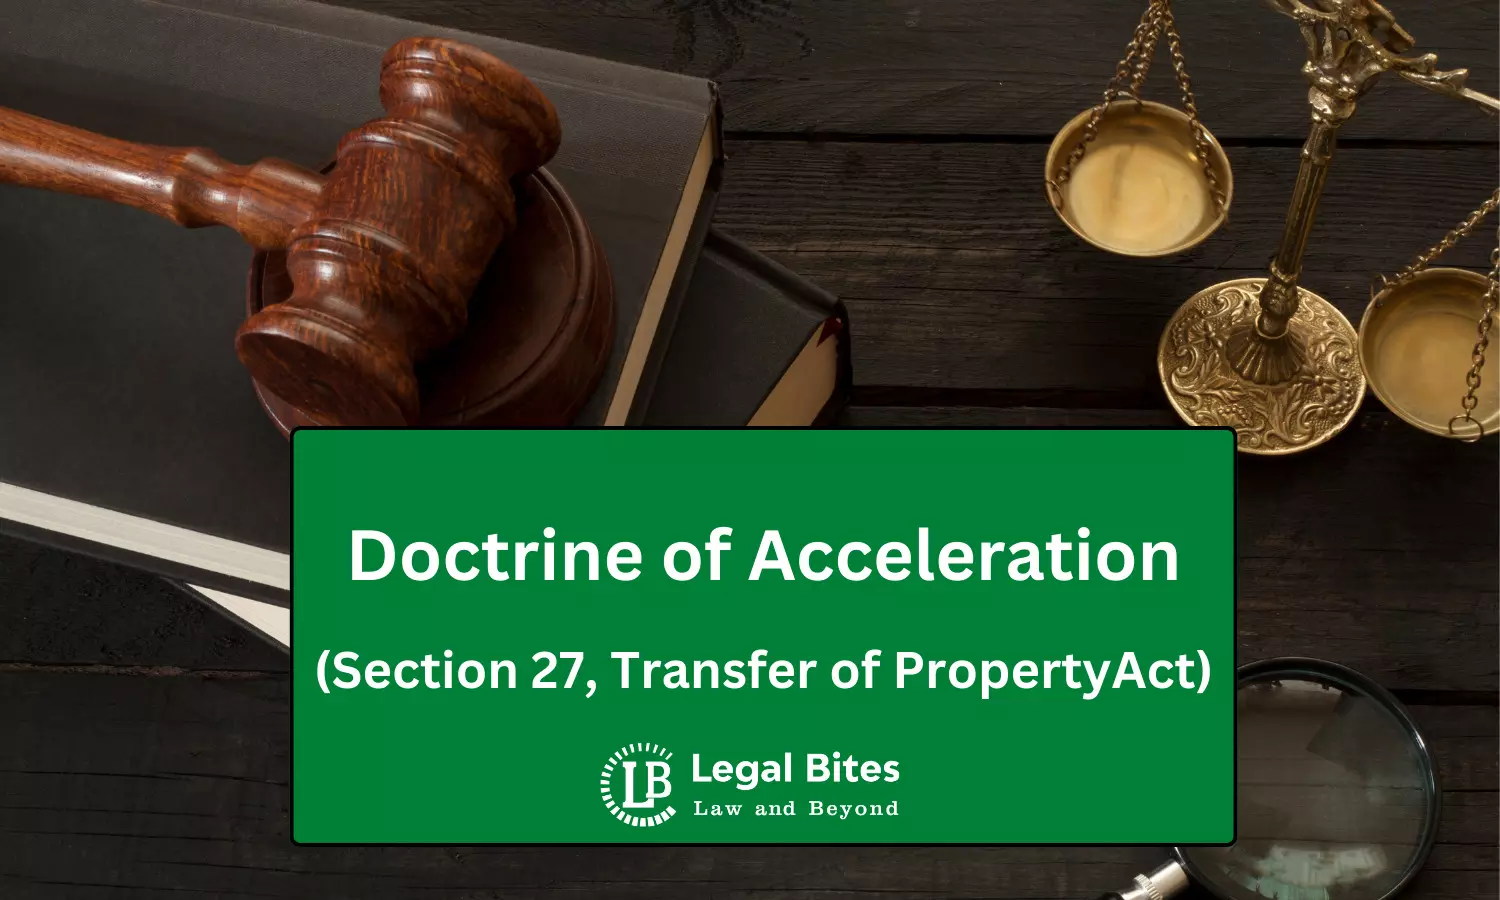 The Doctrine of Acceleration under the Transfer of Property Act, 1882